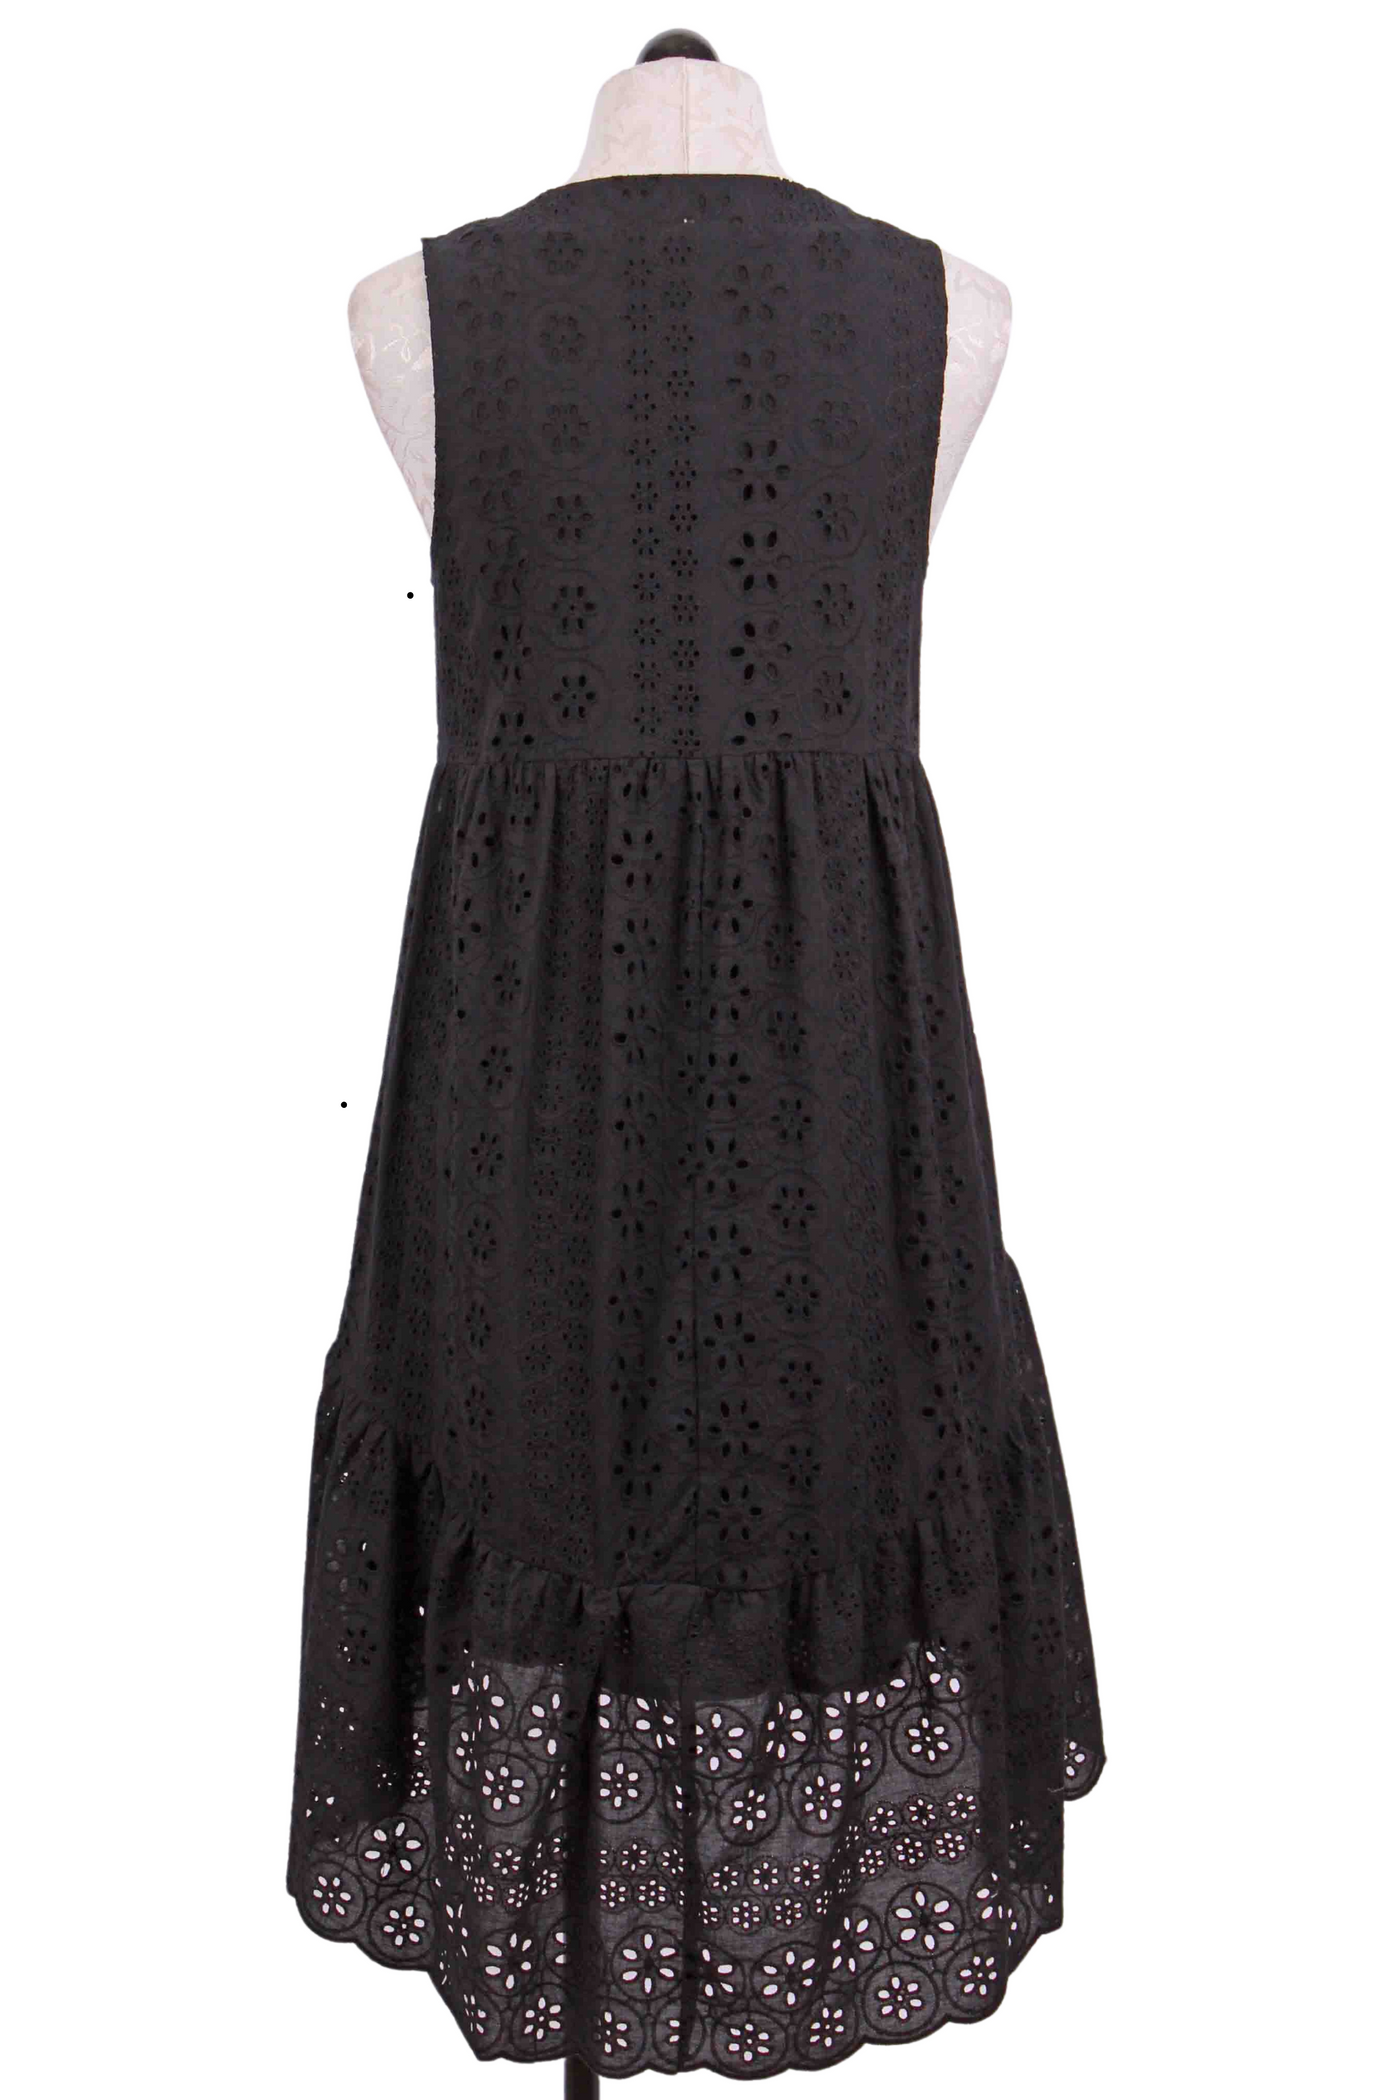 back view of black Cotton Sleeveless Tiered Eyelet V Neck Dress by Apricot